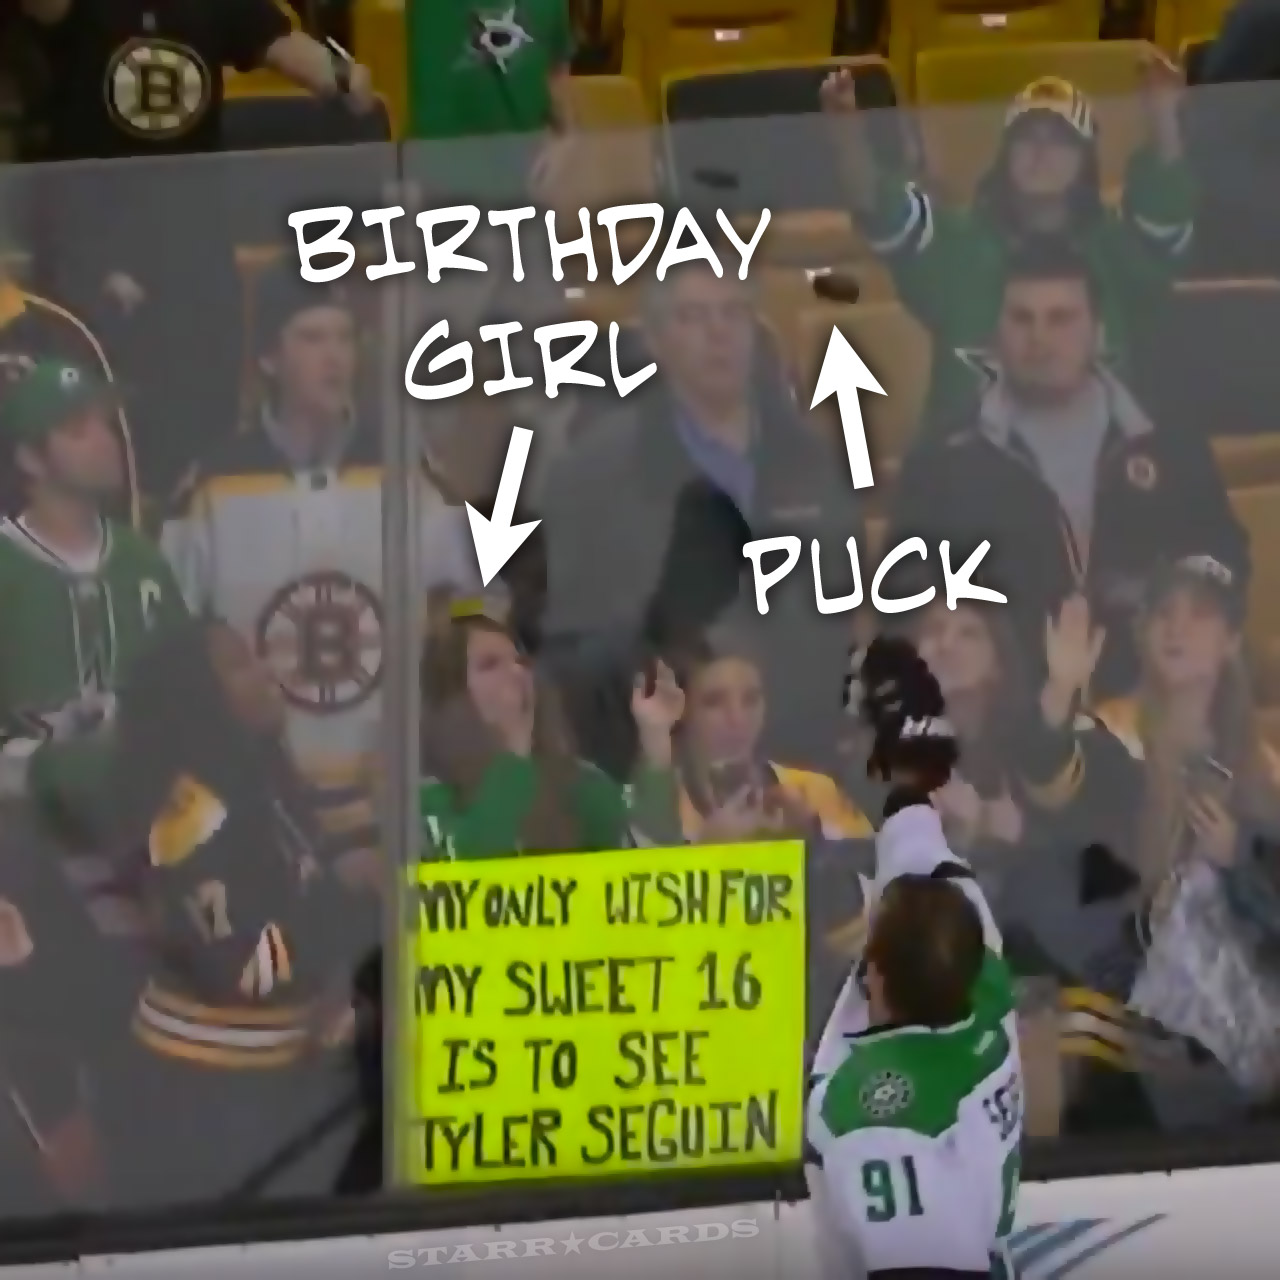 Tyler Seguin throws Kathryn a puck on her 16th birthday